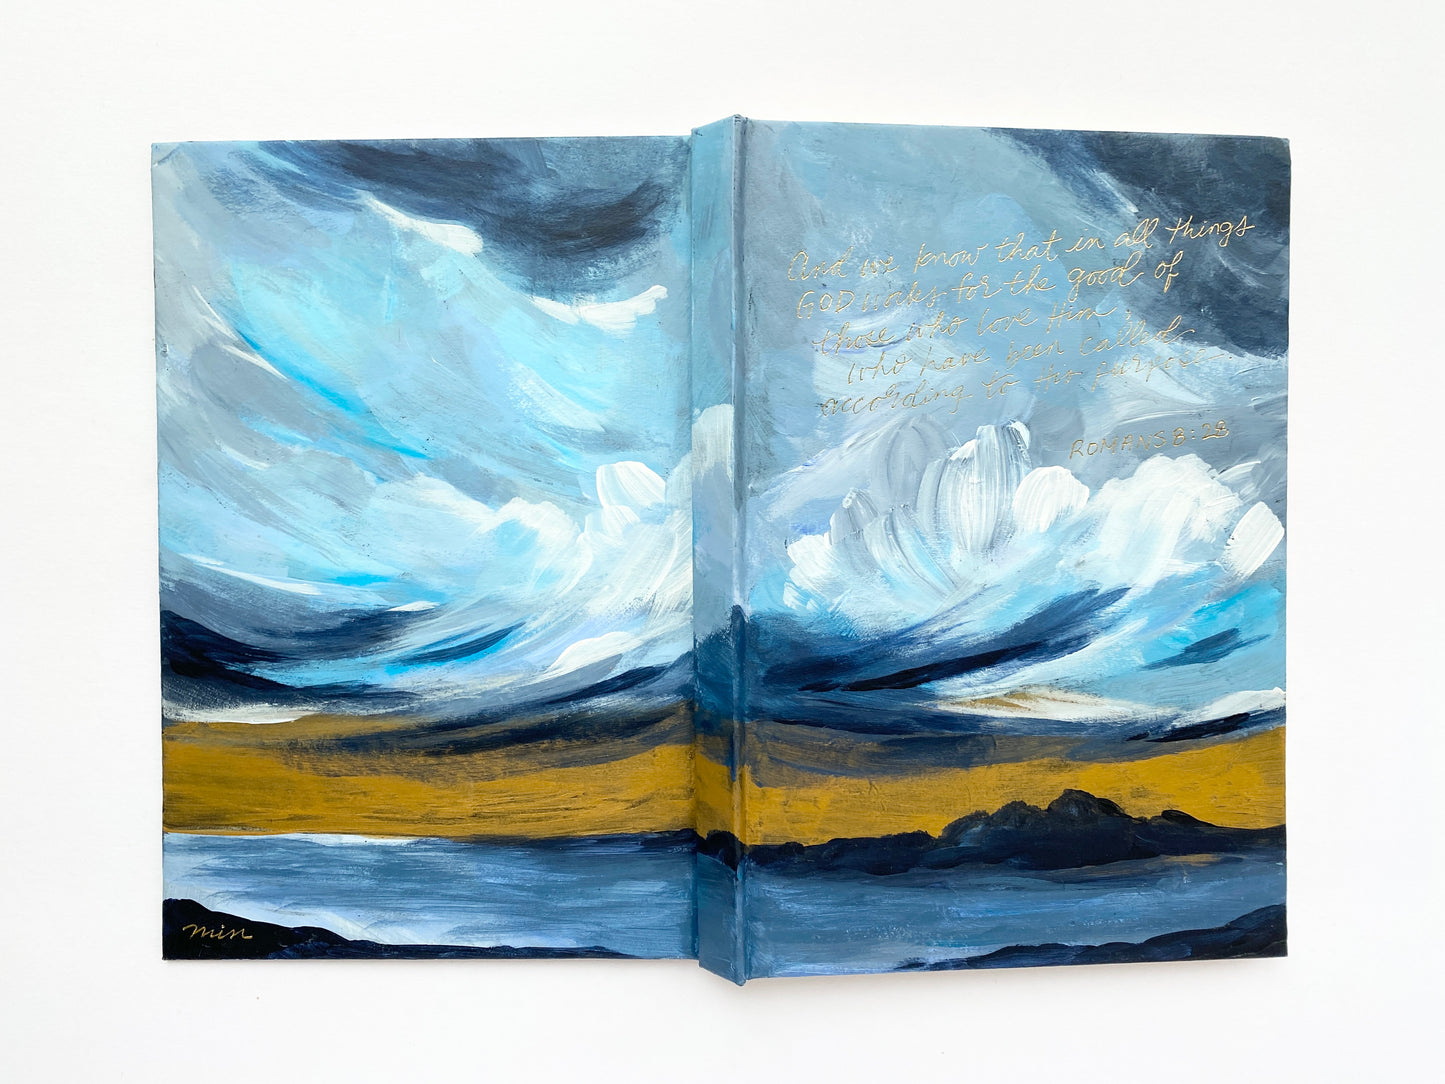 Golden Sky No.1 | Hand-painted Journal with Romans 8:28